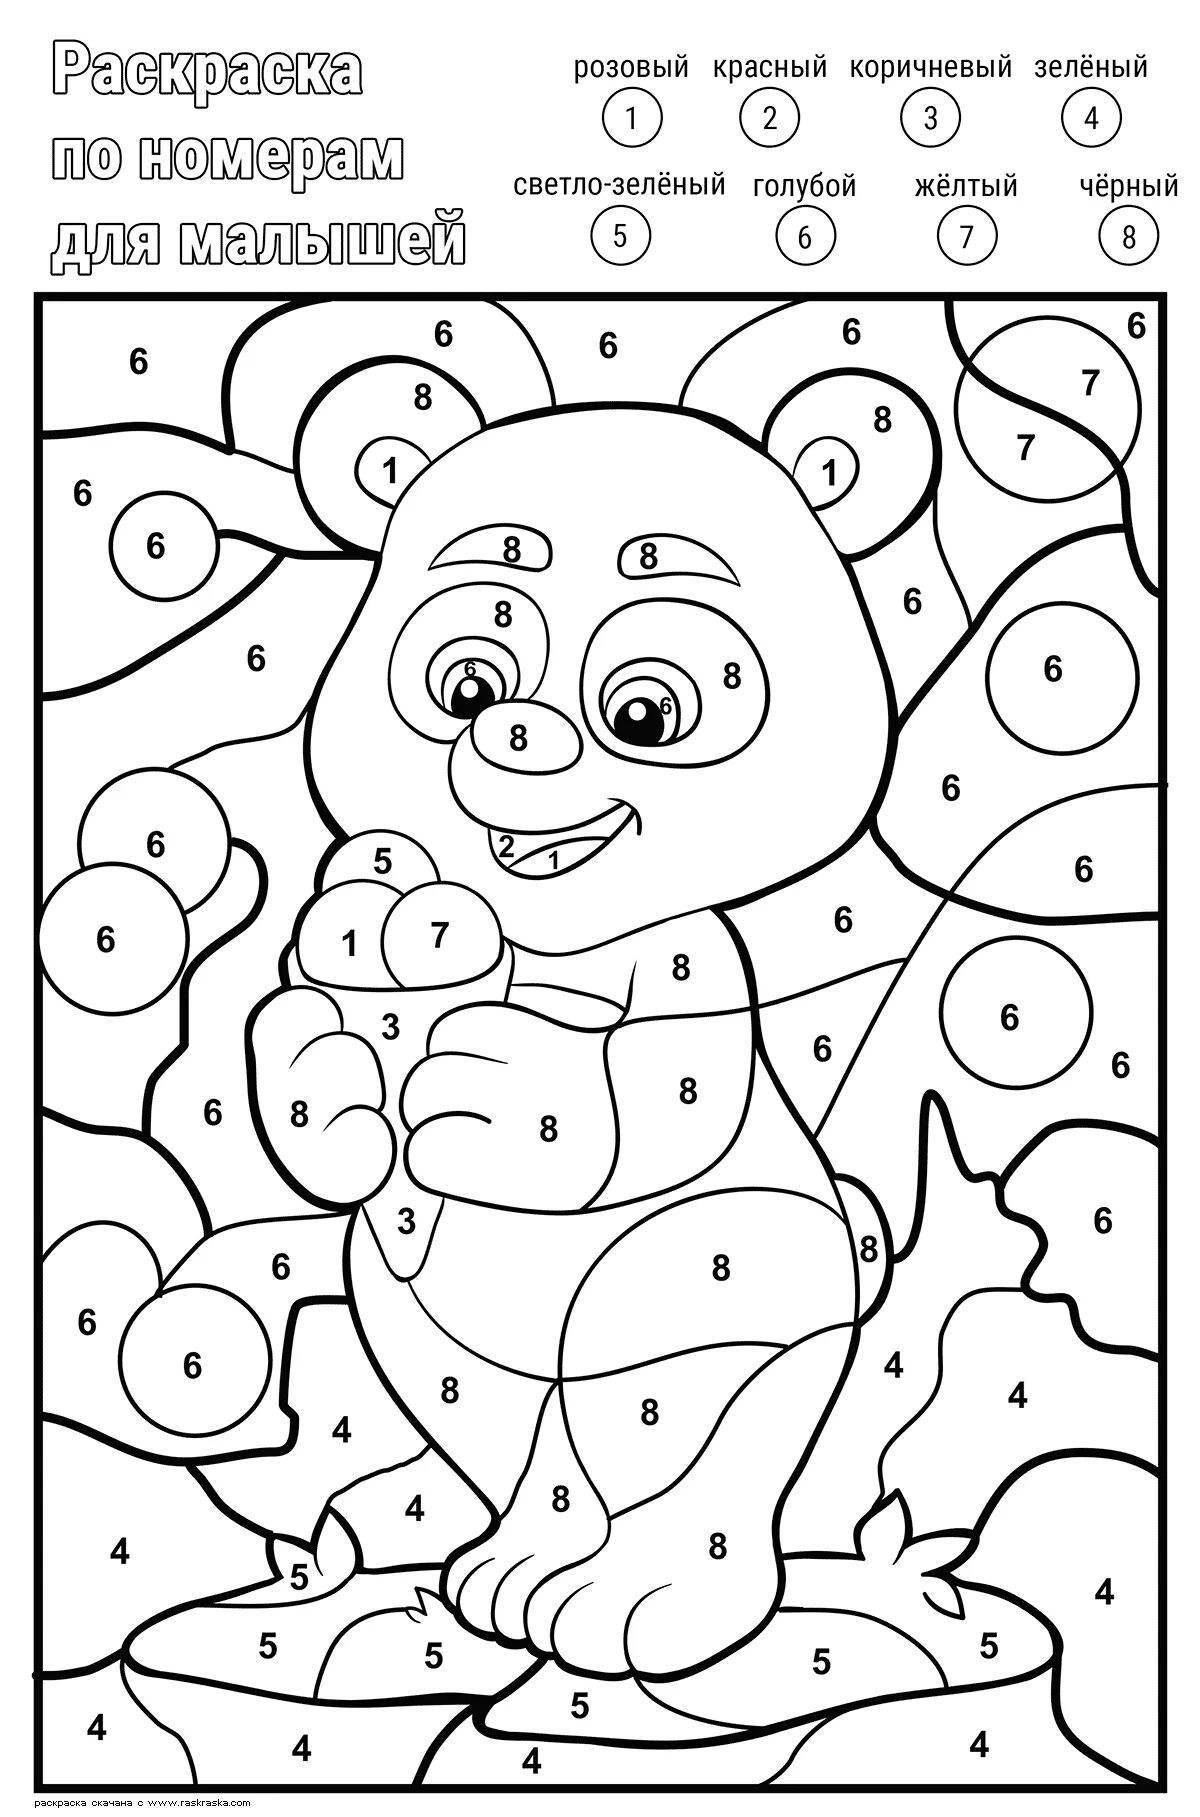 Exciting number coloring game